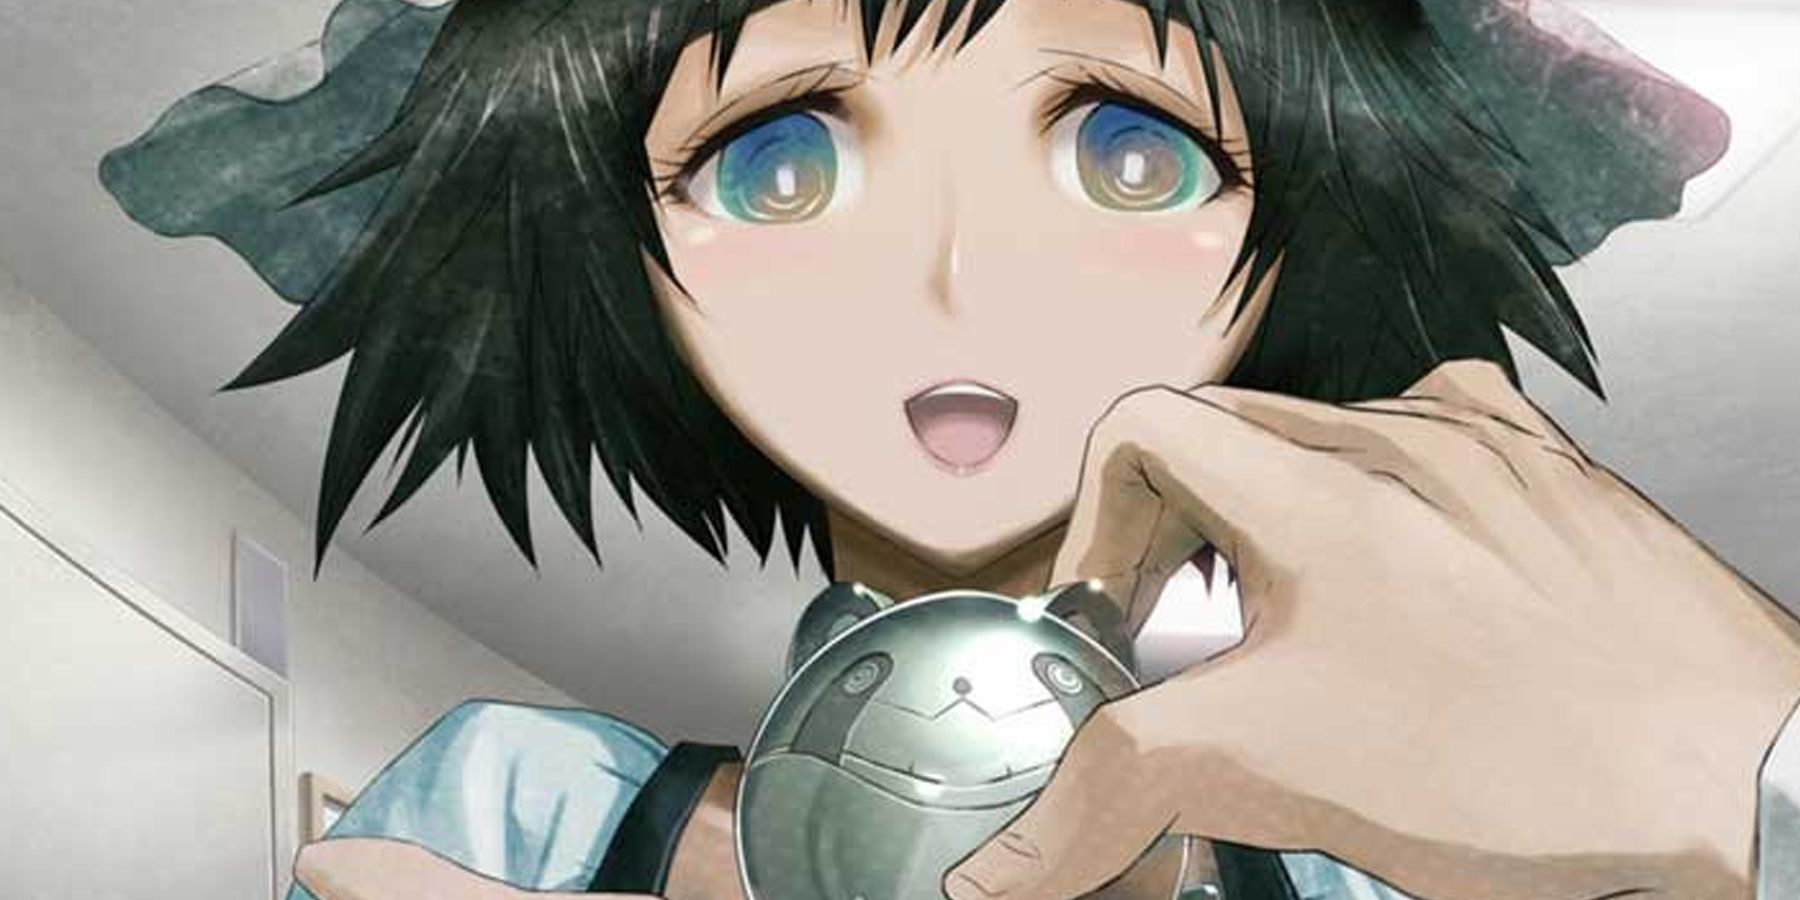 Mayuri is one of the central characters in Steins Gate